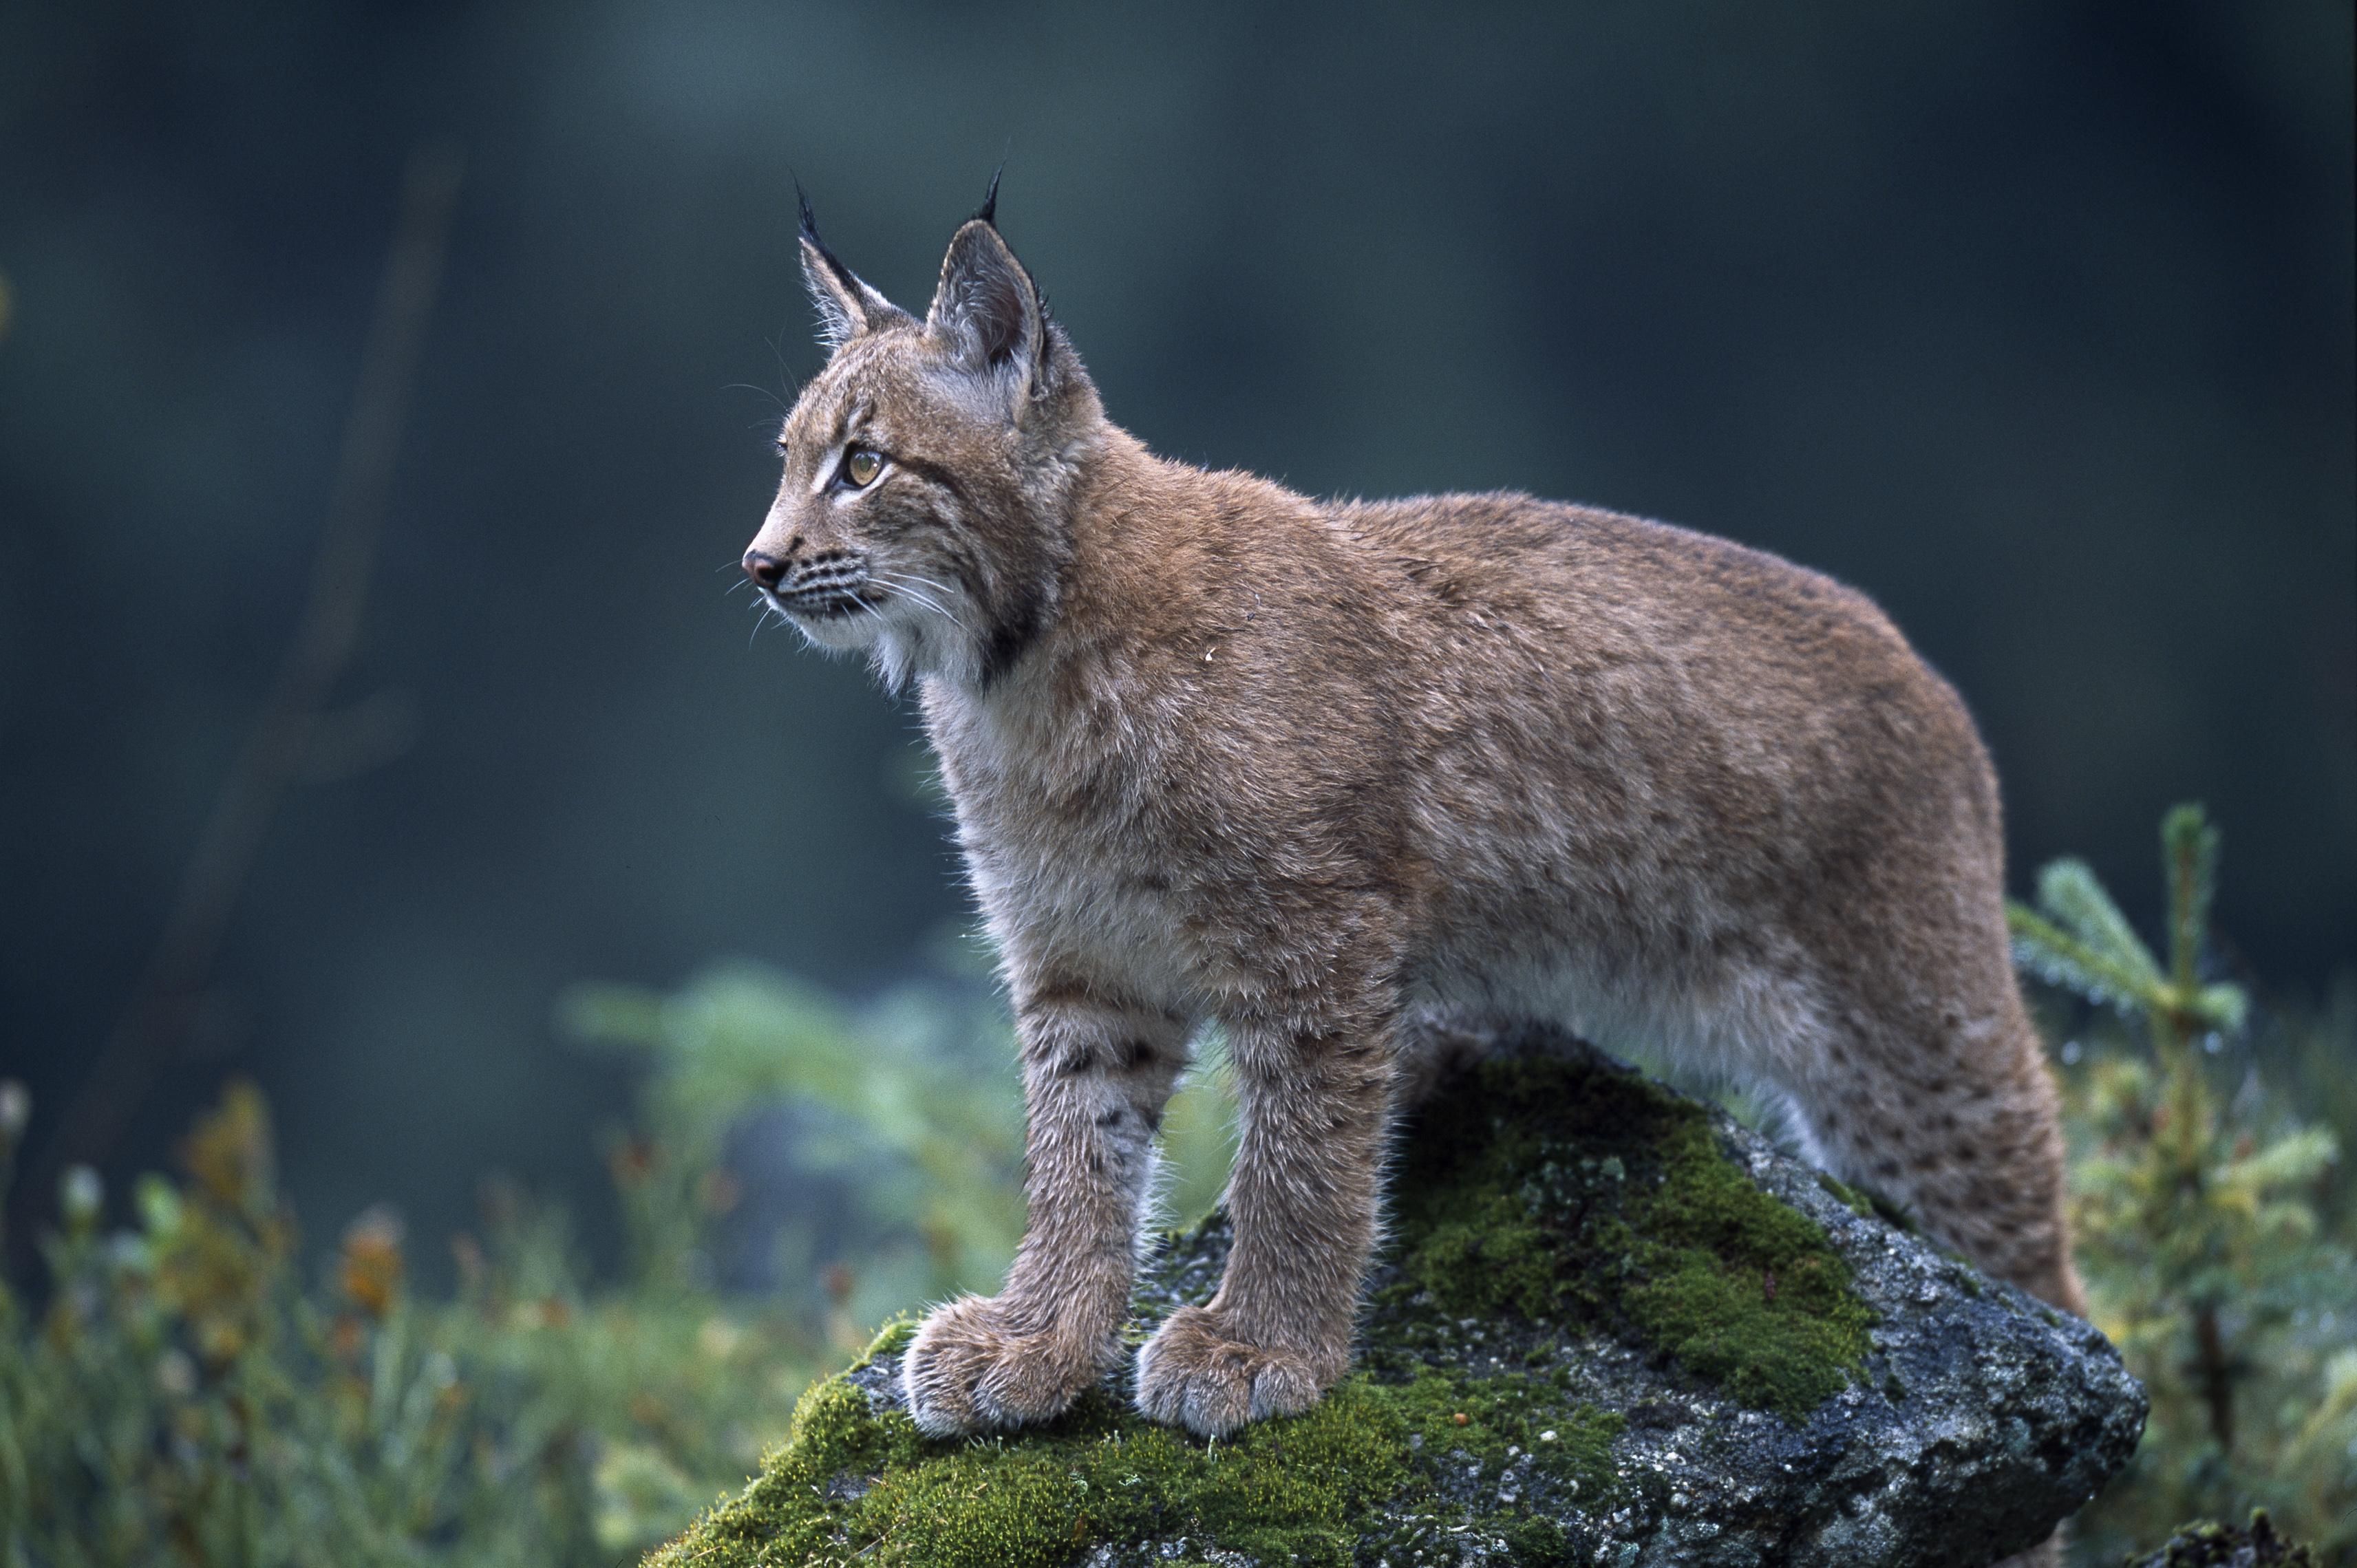 The farming sector are worried about the impact of the reintroduction of the Eurasian lynx